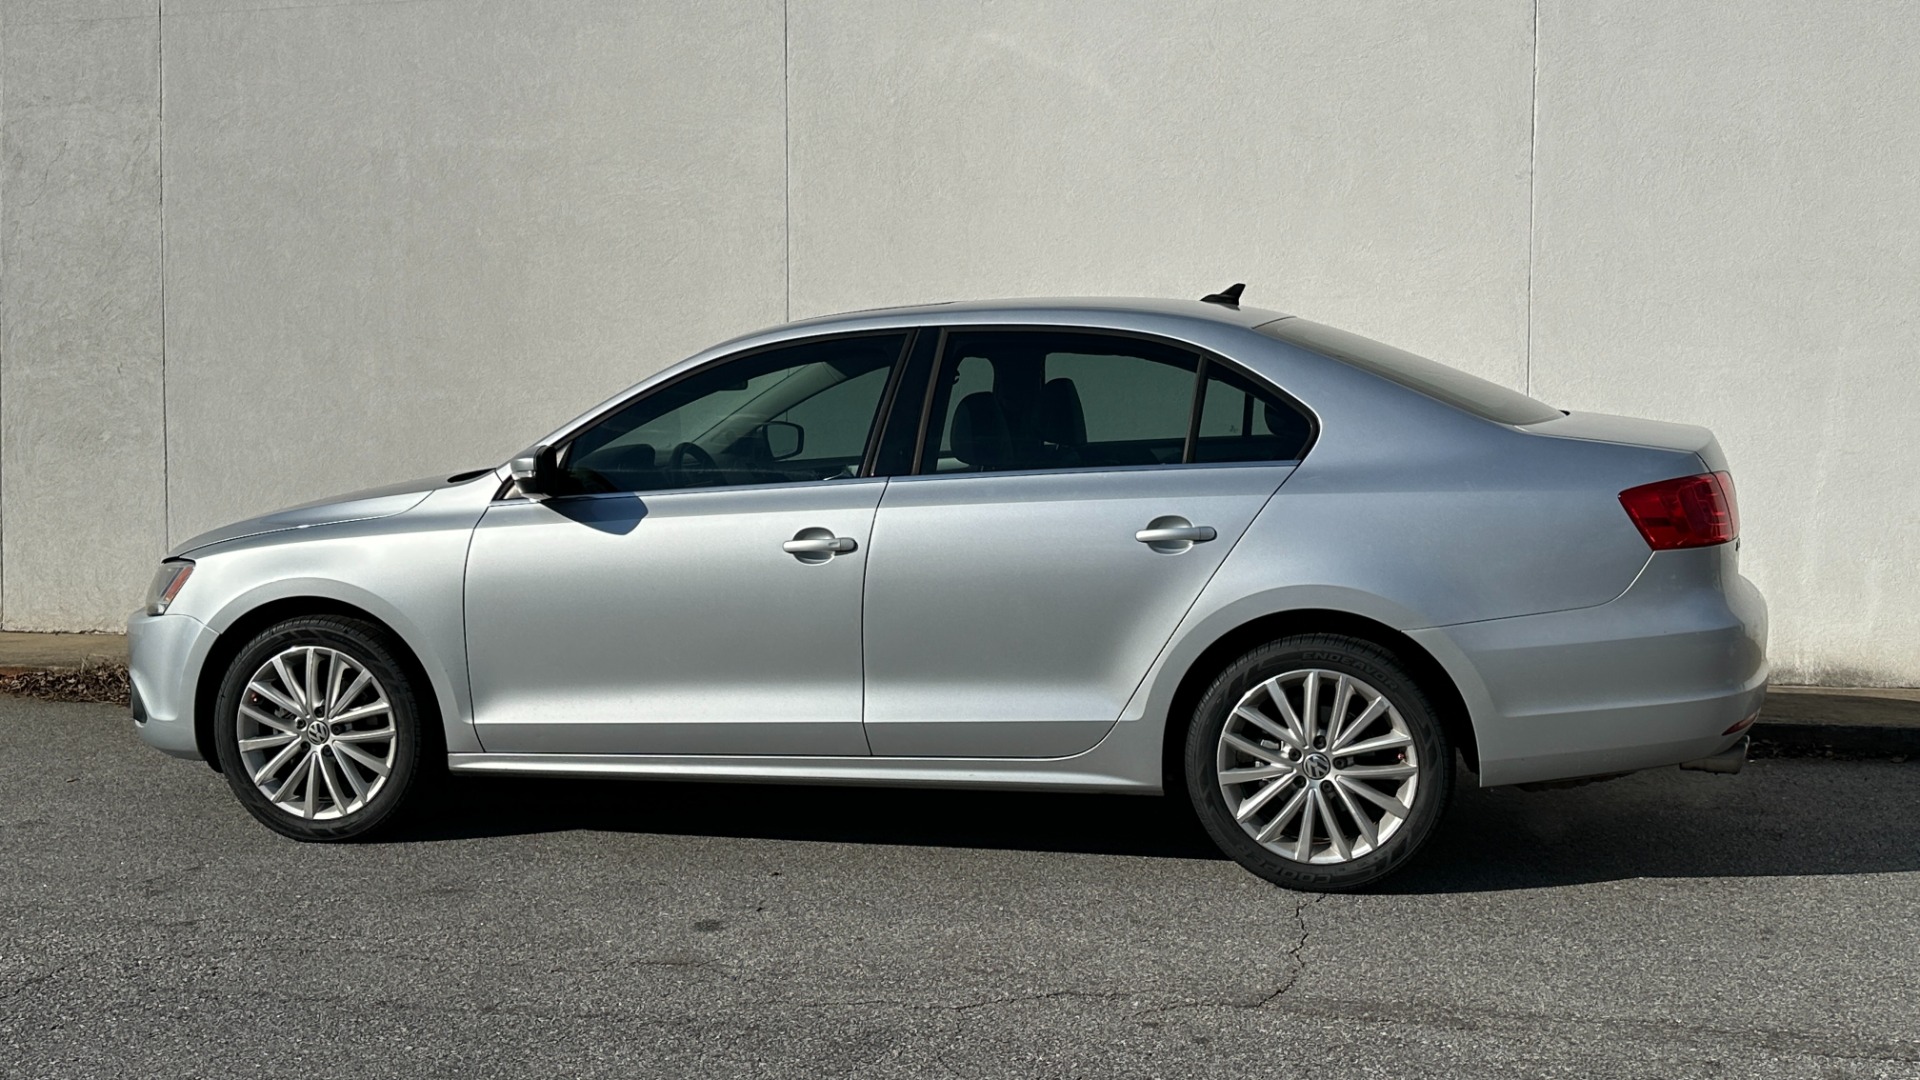 Used 2011 Volkswagen Jetta Sedan SEL / LEATHER / SUNROOF / BLUETOOTH for sale $7,995 at Formula Imports in Charlotte NC 28227 3